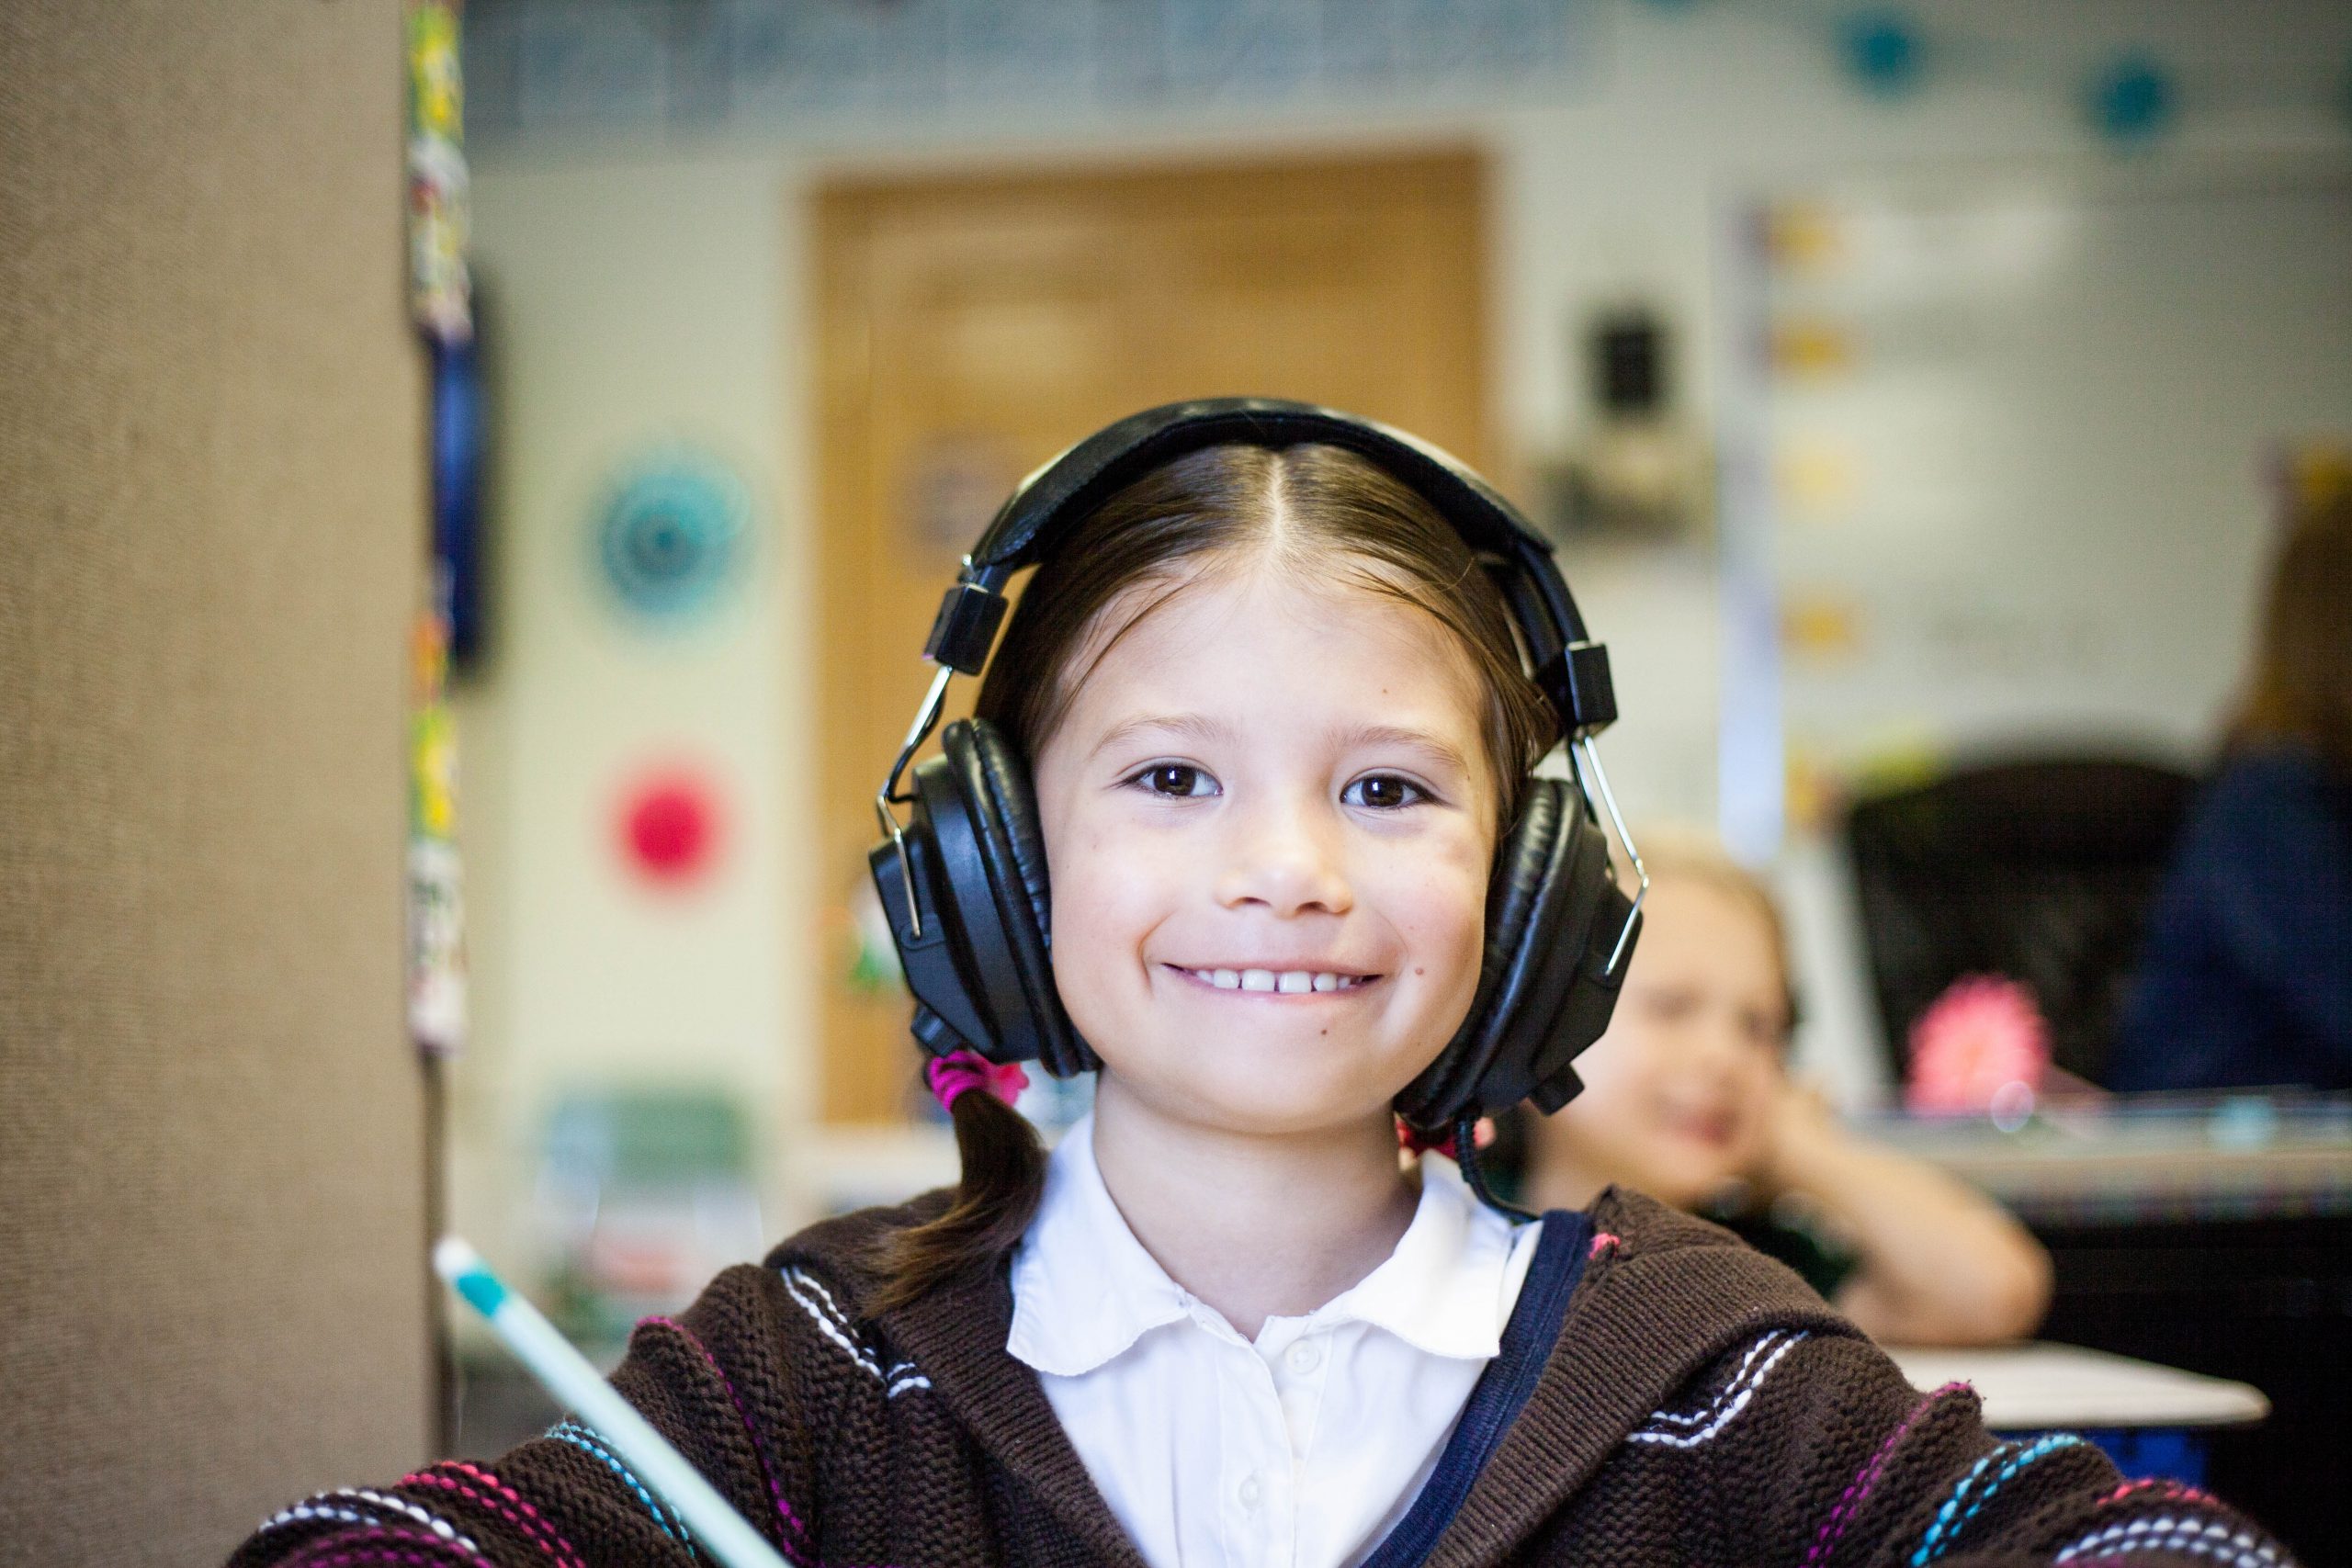 A young student with a beaming smile is wearing large headphones, sitting in a classroom setting. Her bright eyes and cheerful expression suggest engagement and enjoyment, possibly listening to music or engaging in an interactive learning activity. The colorful classroom environment with artwork in the background adds to the lively and positive educational atmosphere.